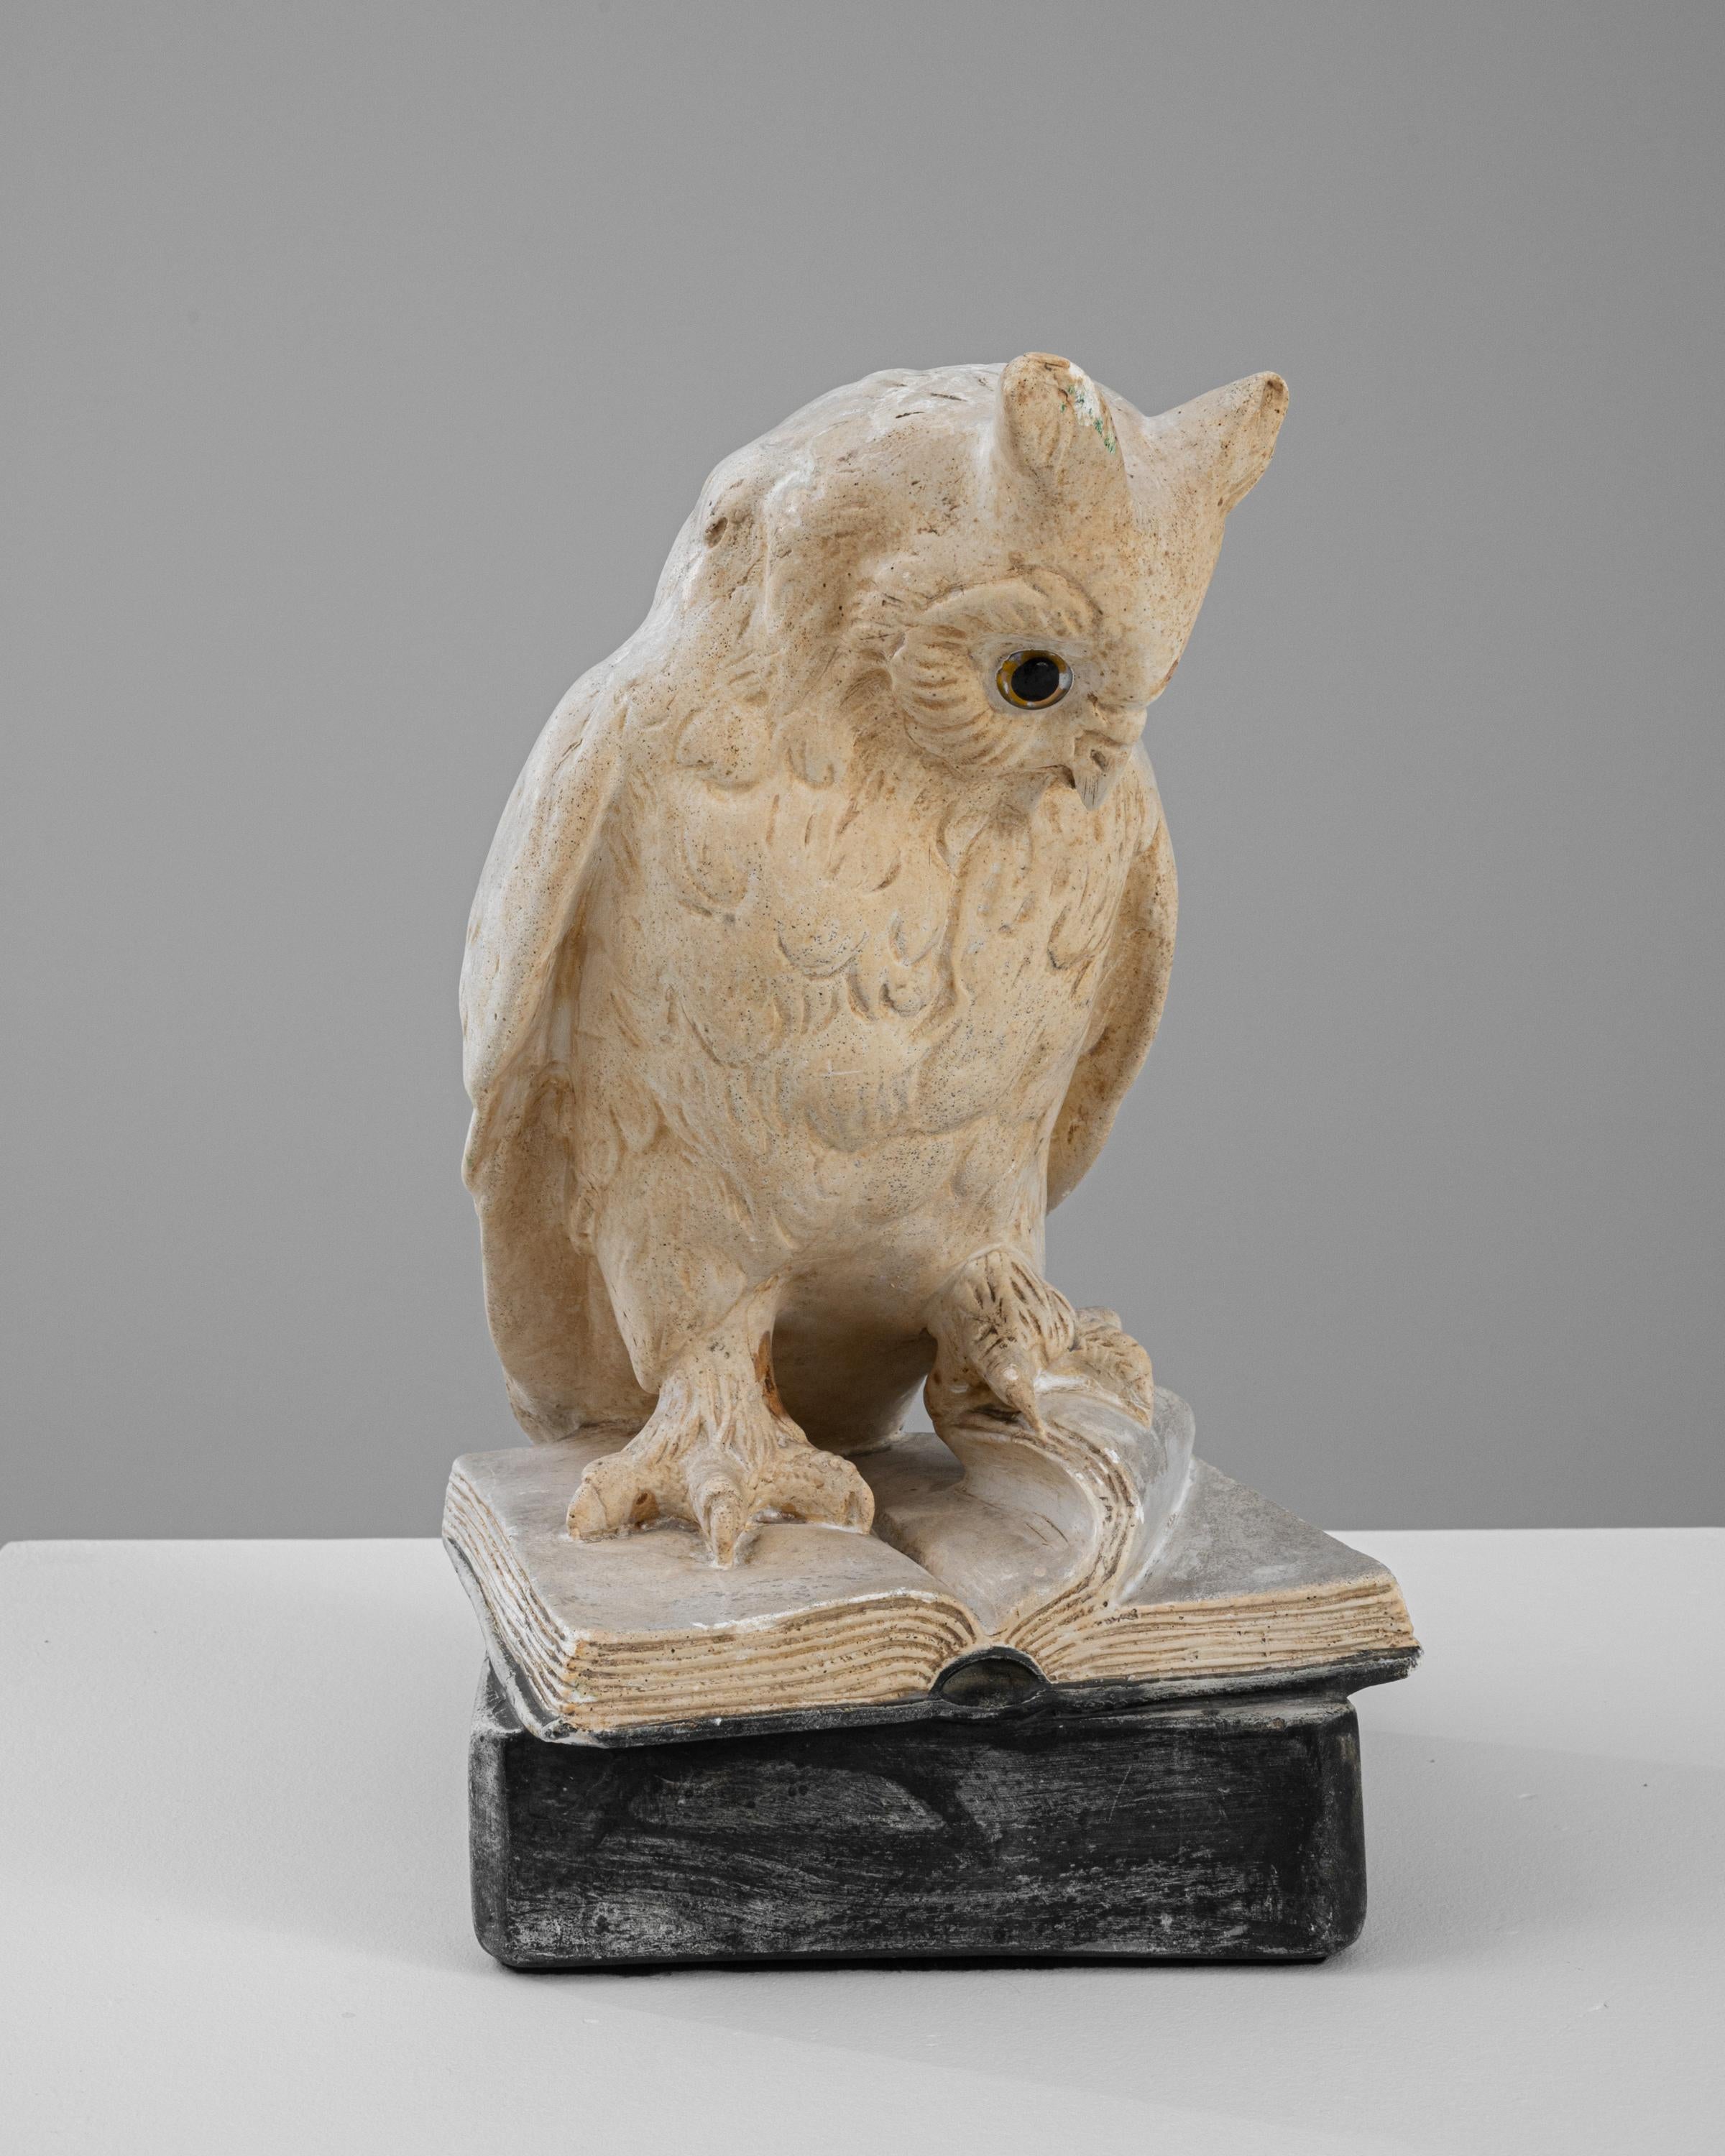 This 20th Century French Plaster Sculpture offers a unique and artistic depiction of an owl perched thoughtfully on an open book. The sculpture combines intricate detailing with a subtle palette of natural plaster tones to highlight the textures and